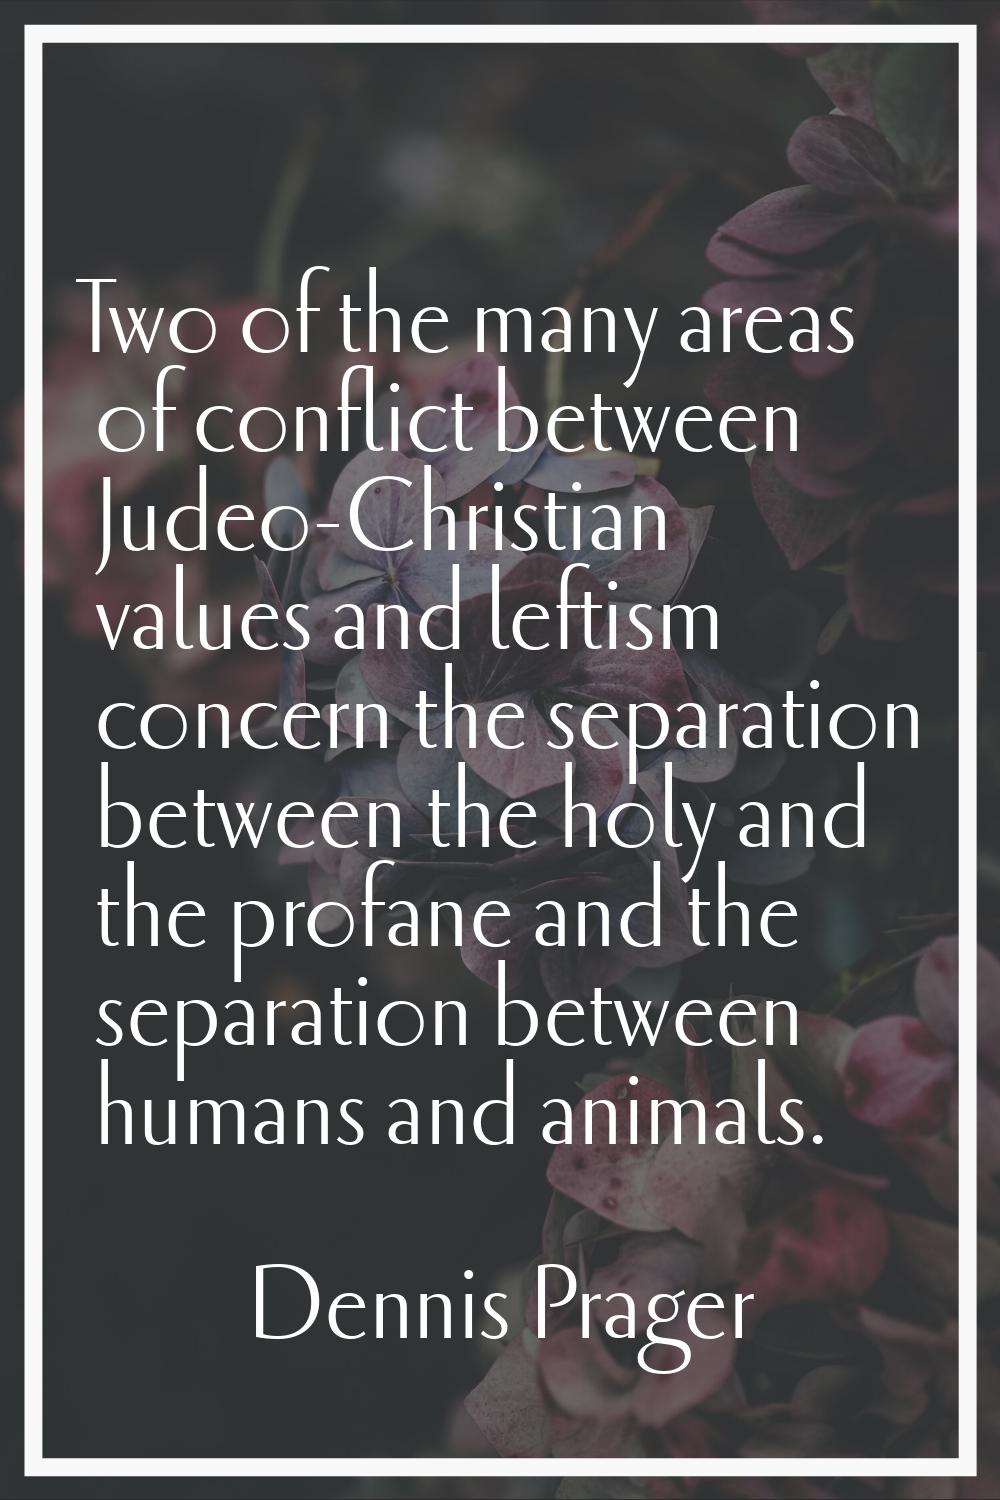 Two of the many areas of conflict between Judeo-Christian values and leftism concern the separation